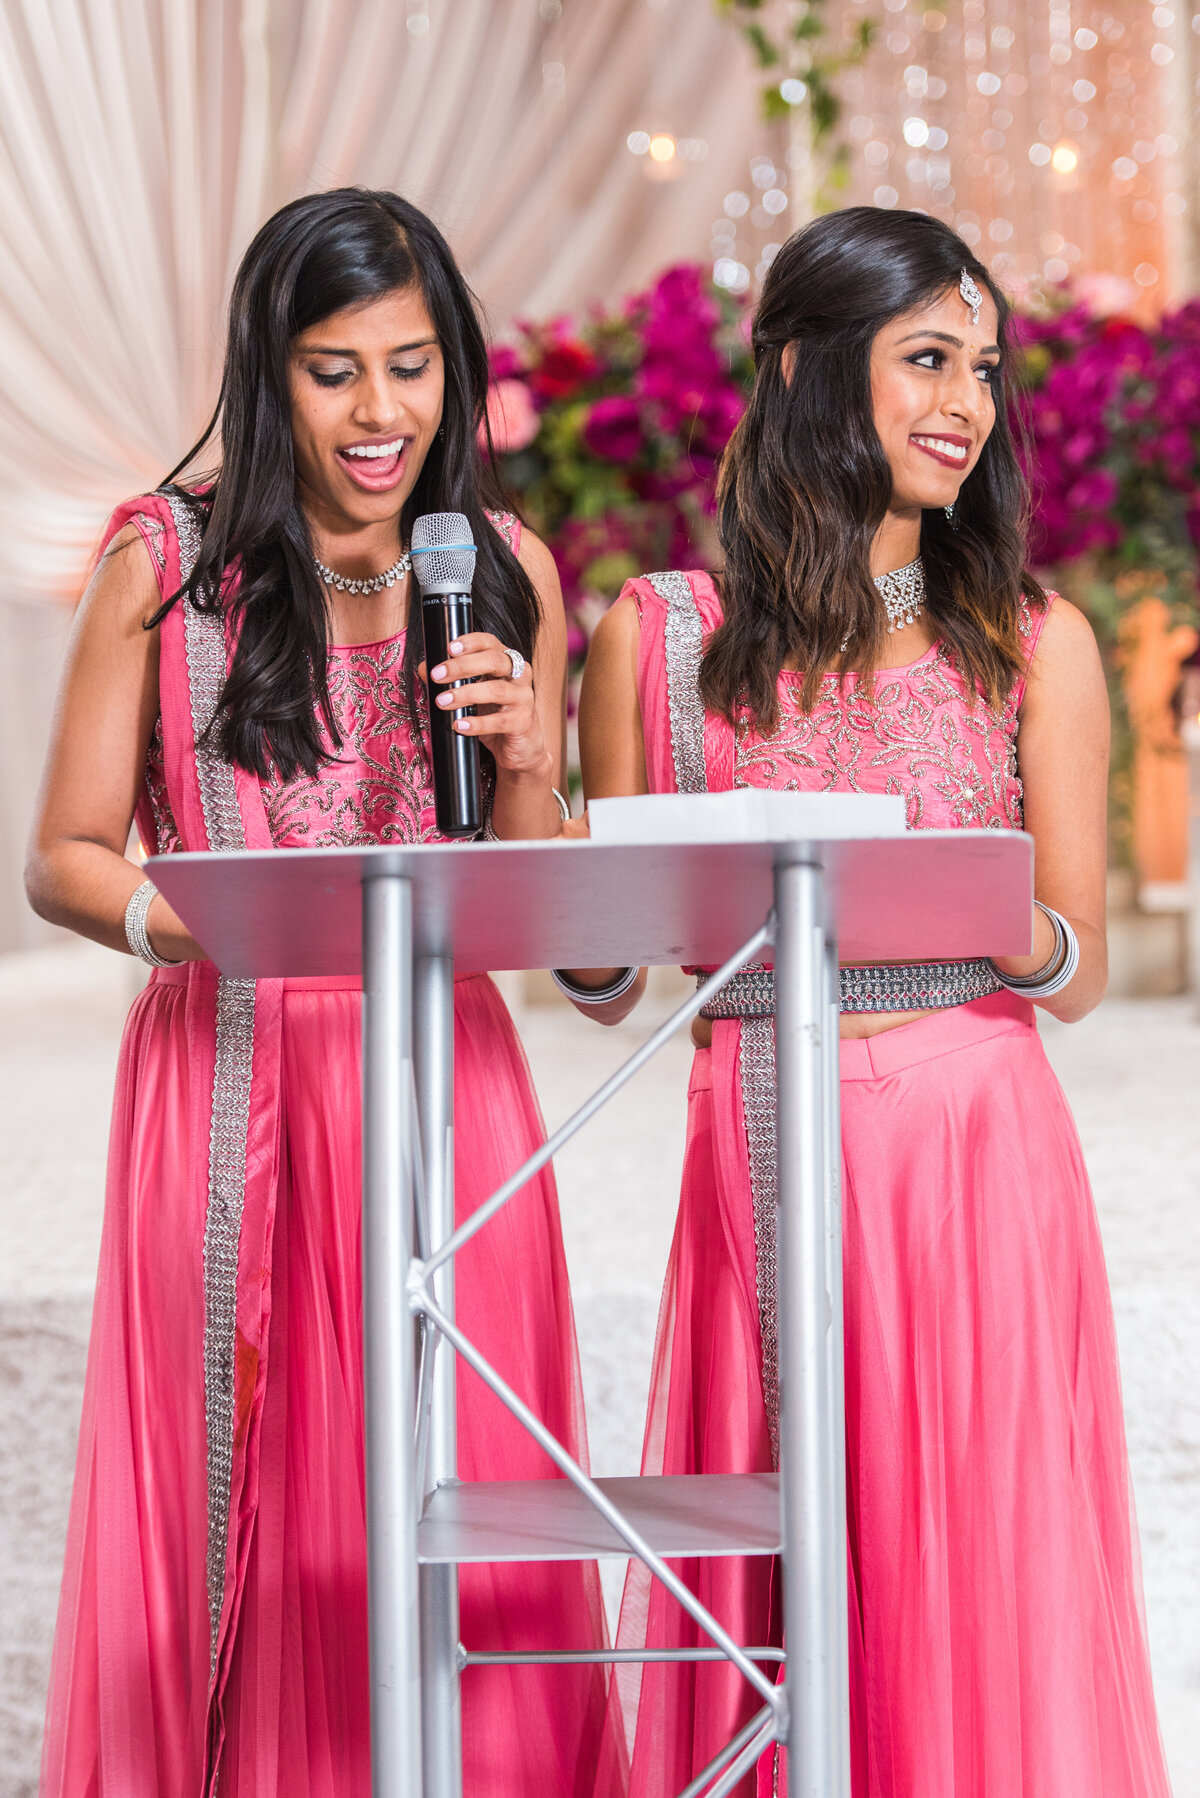 maha_studios_wedding_photography_chicago_new_york_california_sophisticated_and_vibrant_photography_honoring_modern_south_asian_and_multicultural_weddings61